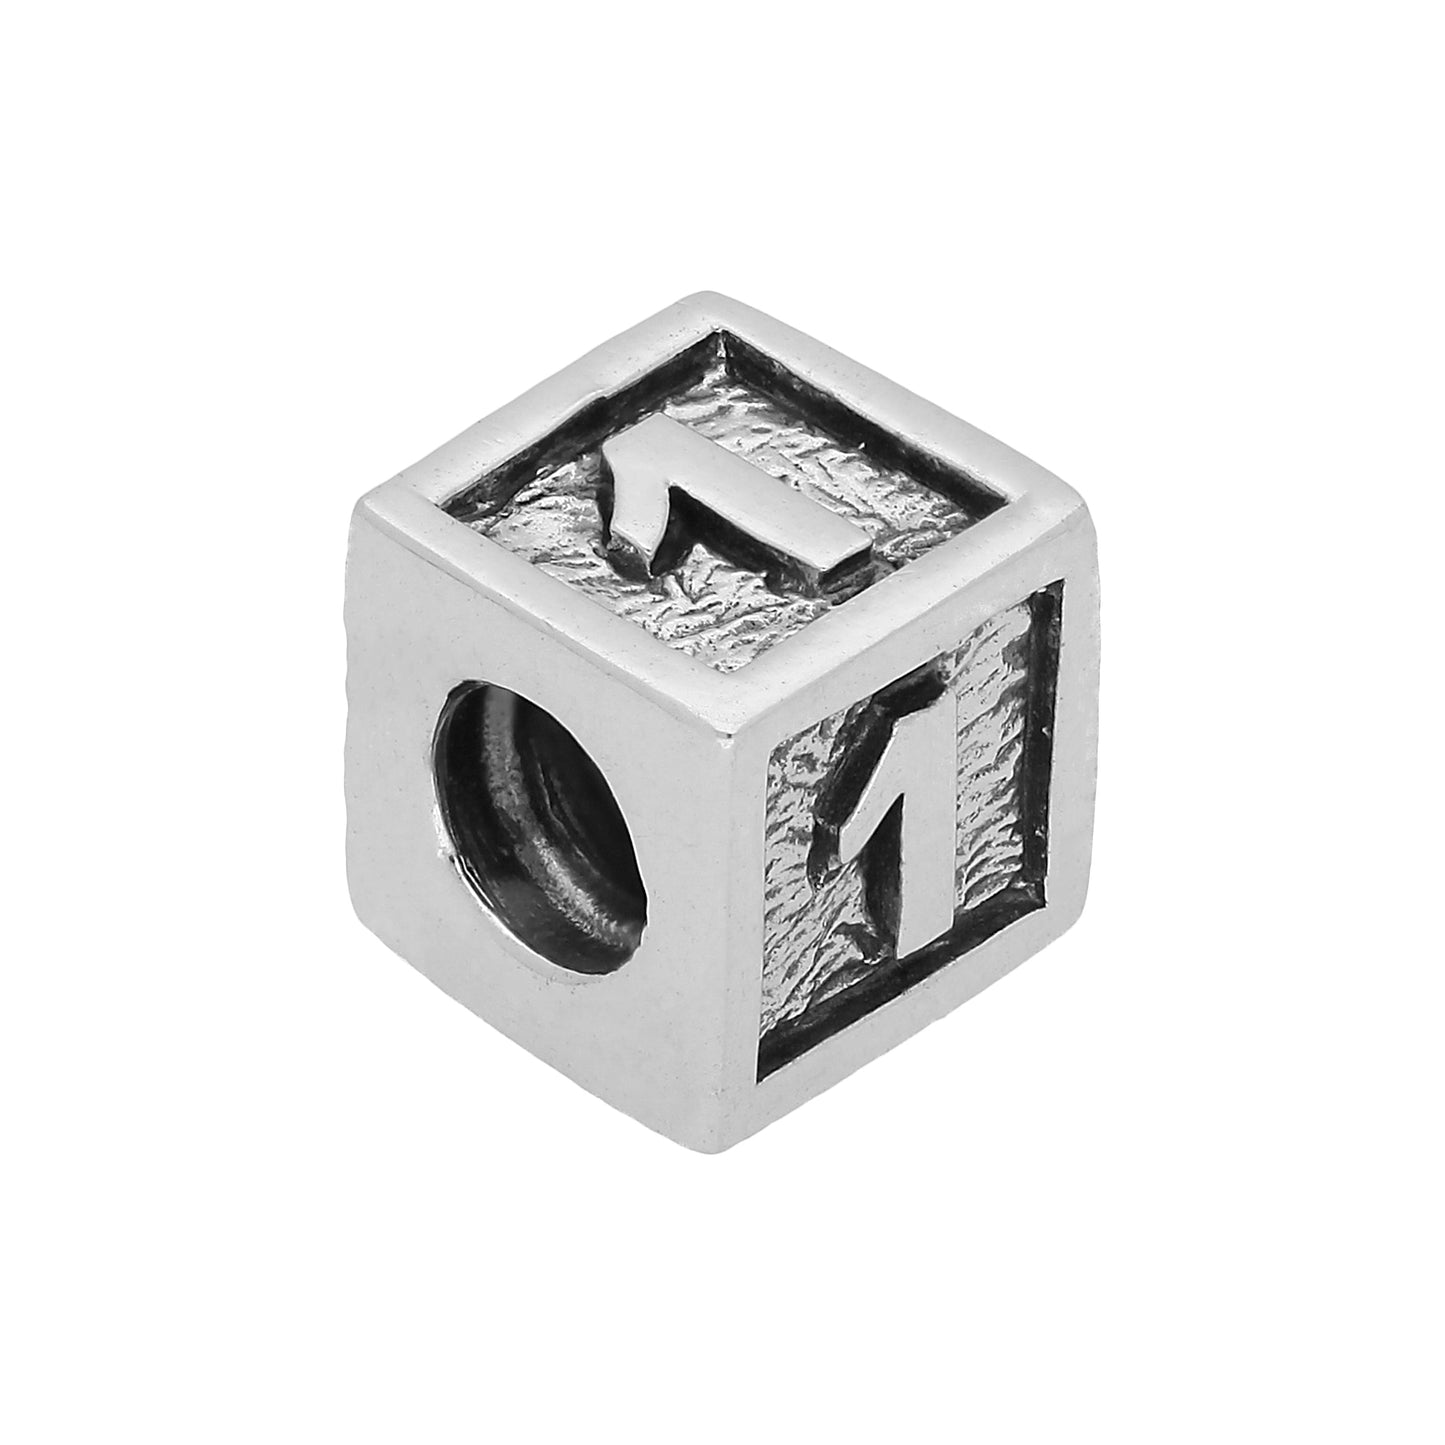 Sterling Silver Number Cube Bead Charm 0-9